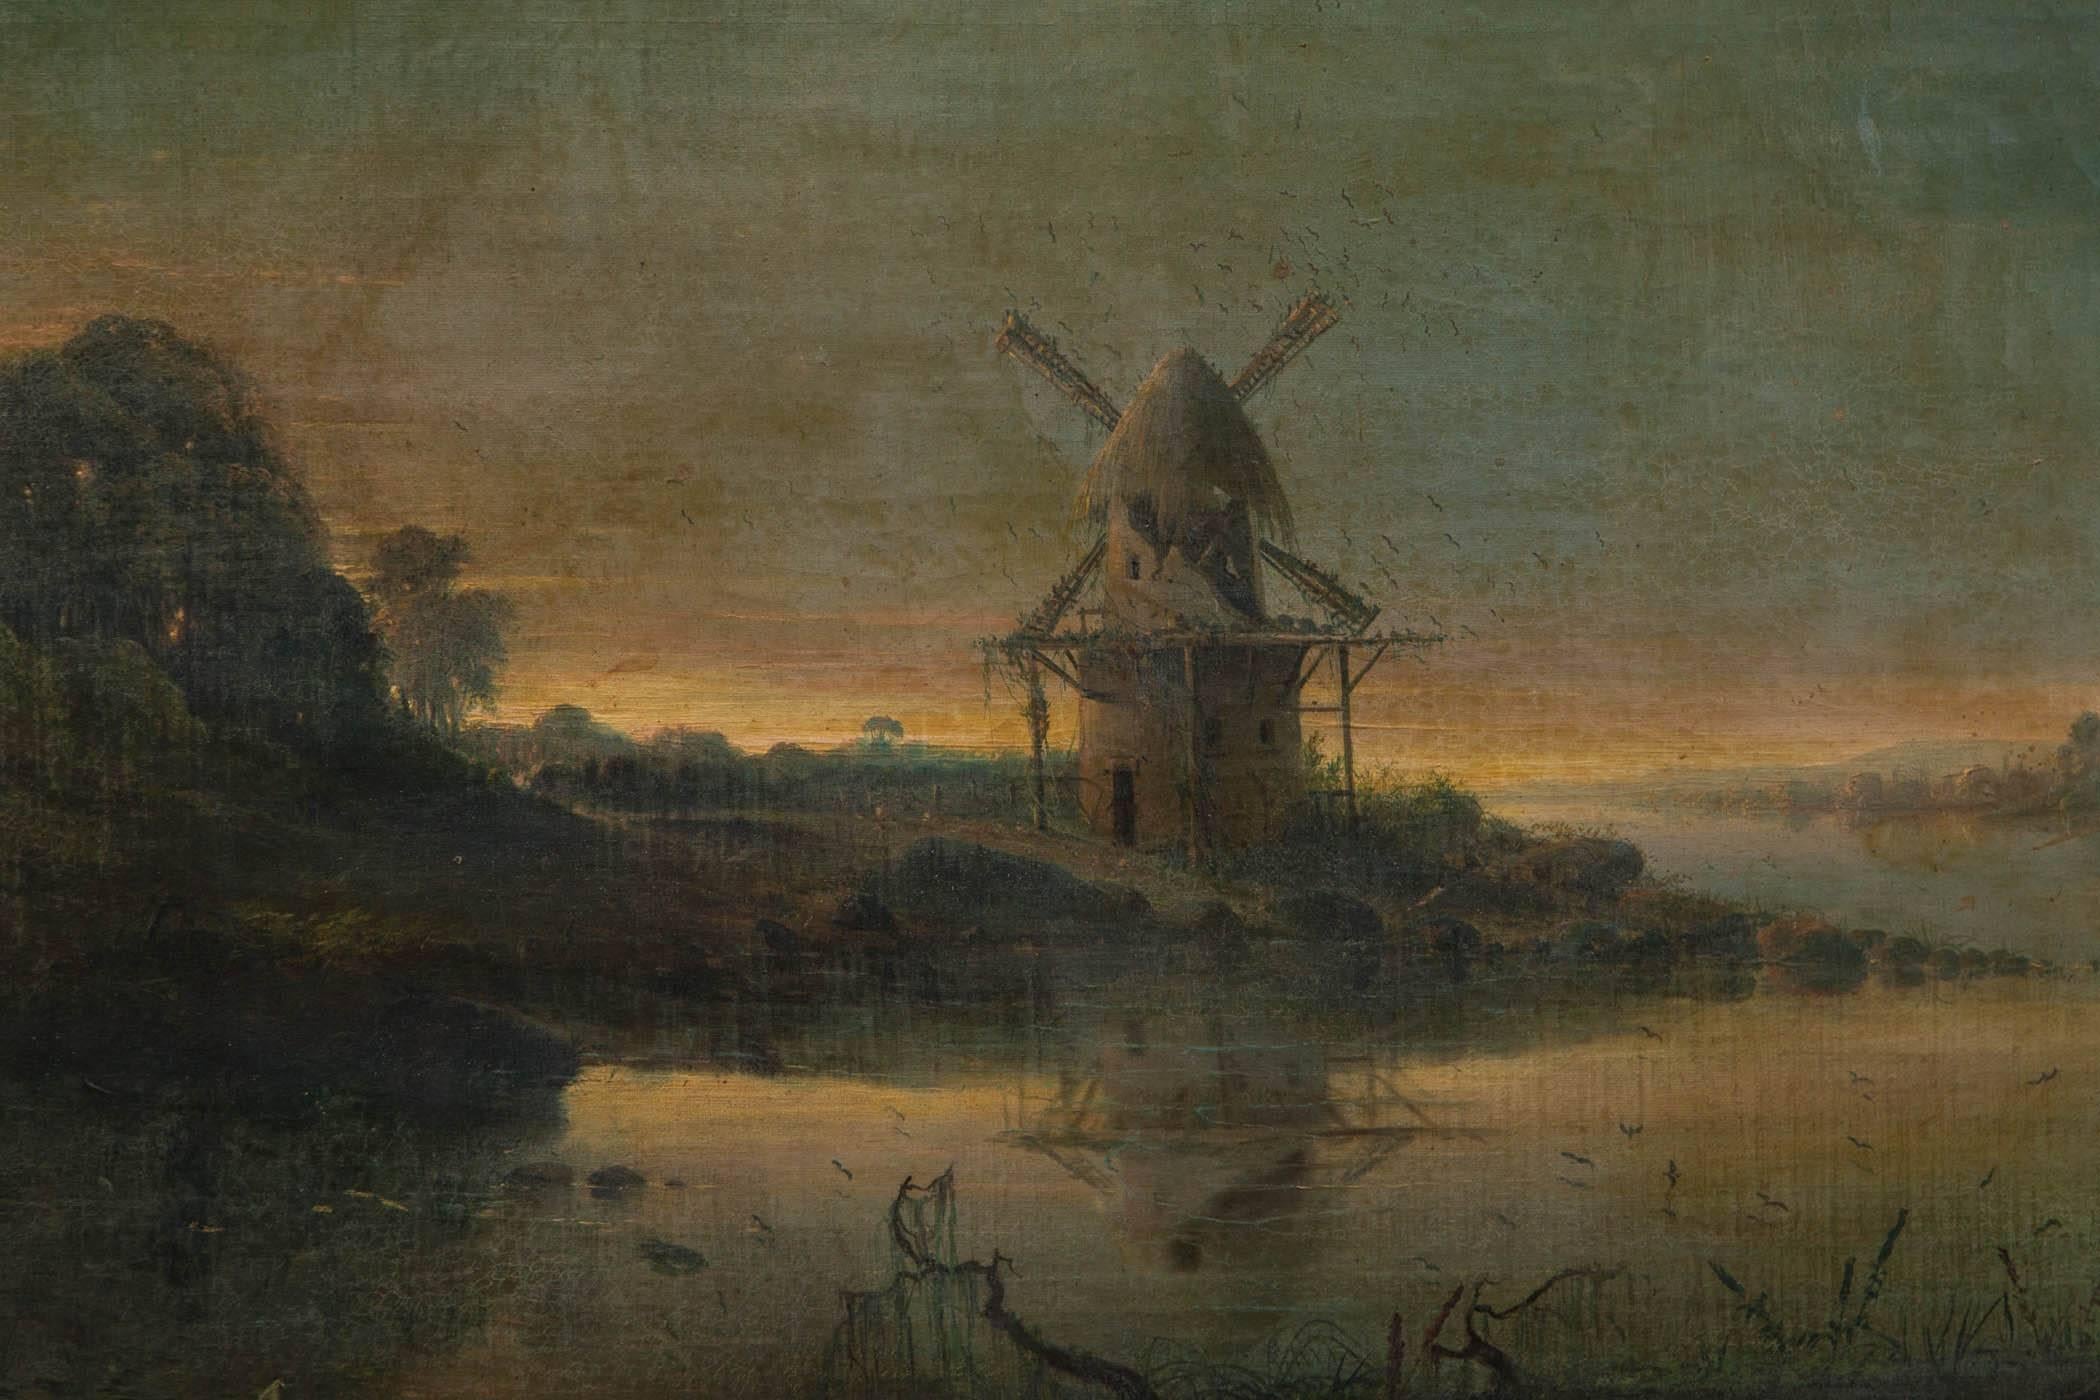 British Oil on Canvas, Windmill by the Water's Edge